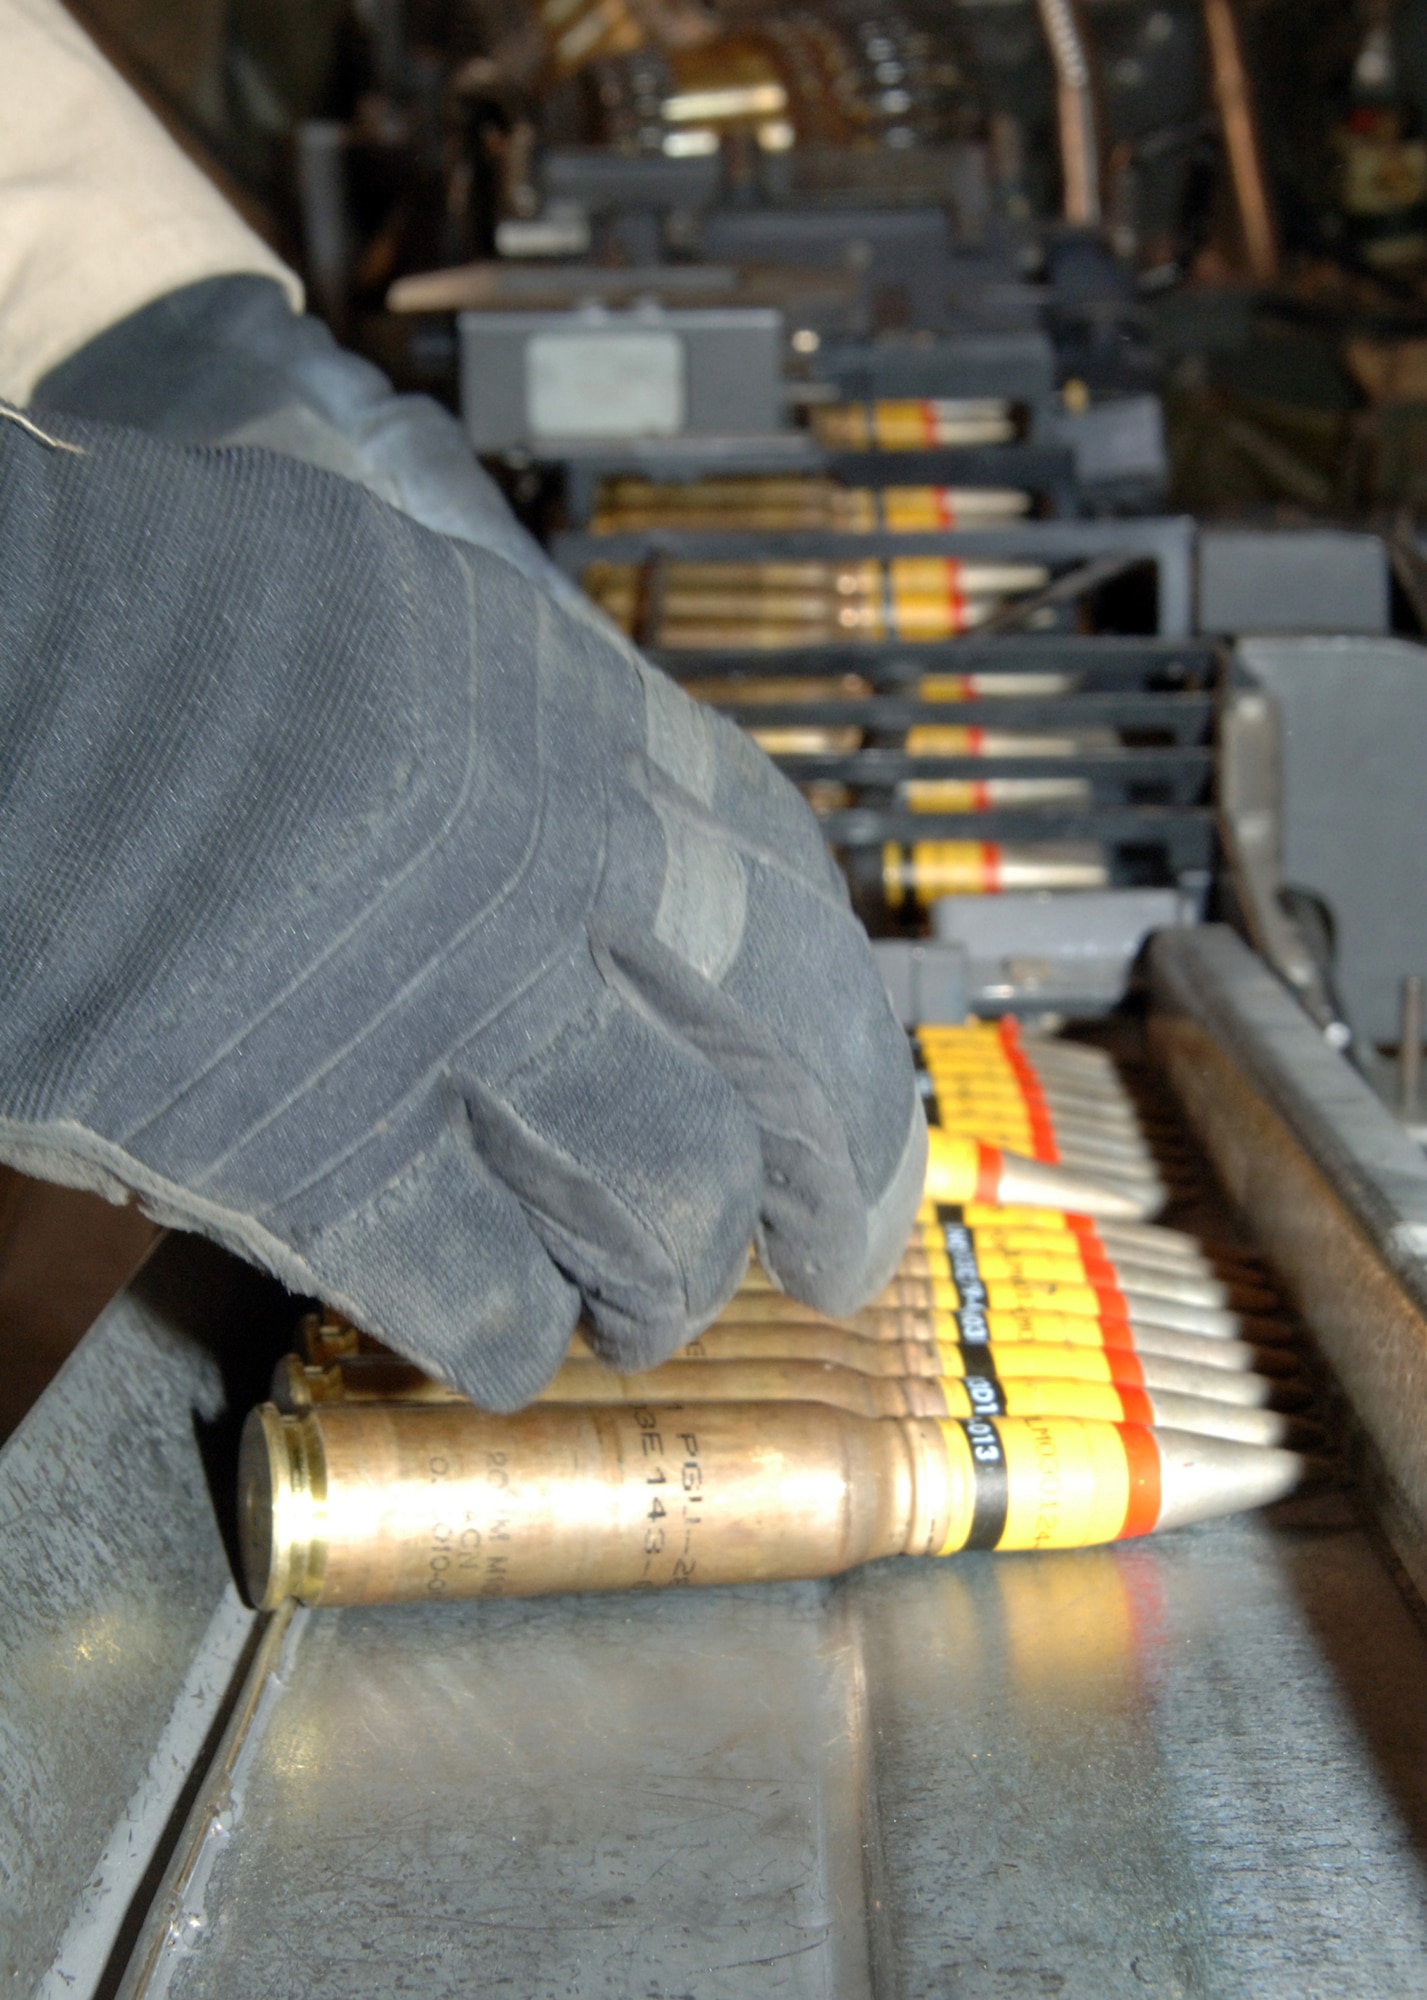 BALAD AIR BASE, Iraq -- High Explosive Incendiary PGU-28A/B 20mm cannon rounds are fed through a 'replenisher' (foreground) into a Universal Ammunition Loading System (UALS). UALS are then used to transfer the cannon rounds directly into F-16 weapon systems. The new PGU cannon rounds were first validated at a firing range Feb. 22, then used in battle against insurgents east of Baghdad Feb. 26.  (U.S. Air Force photo/Capt. Ken Hall)